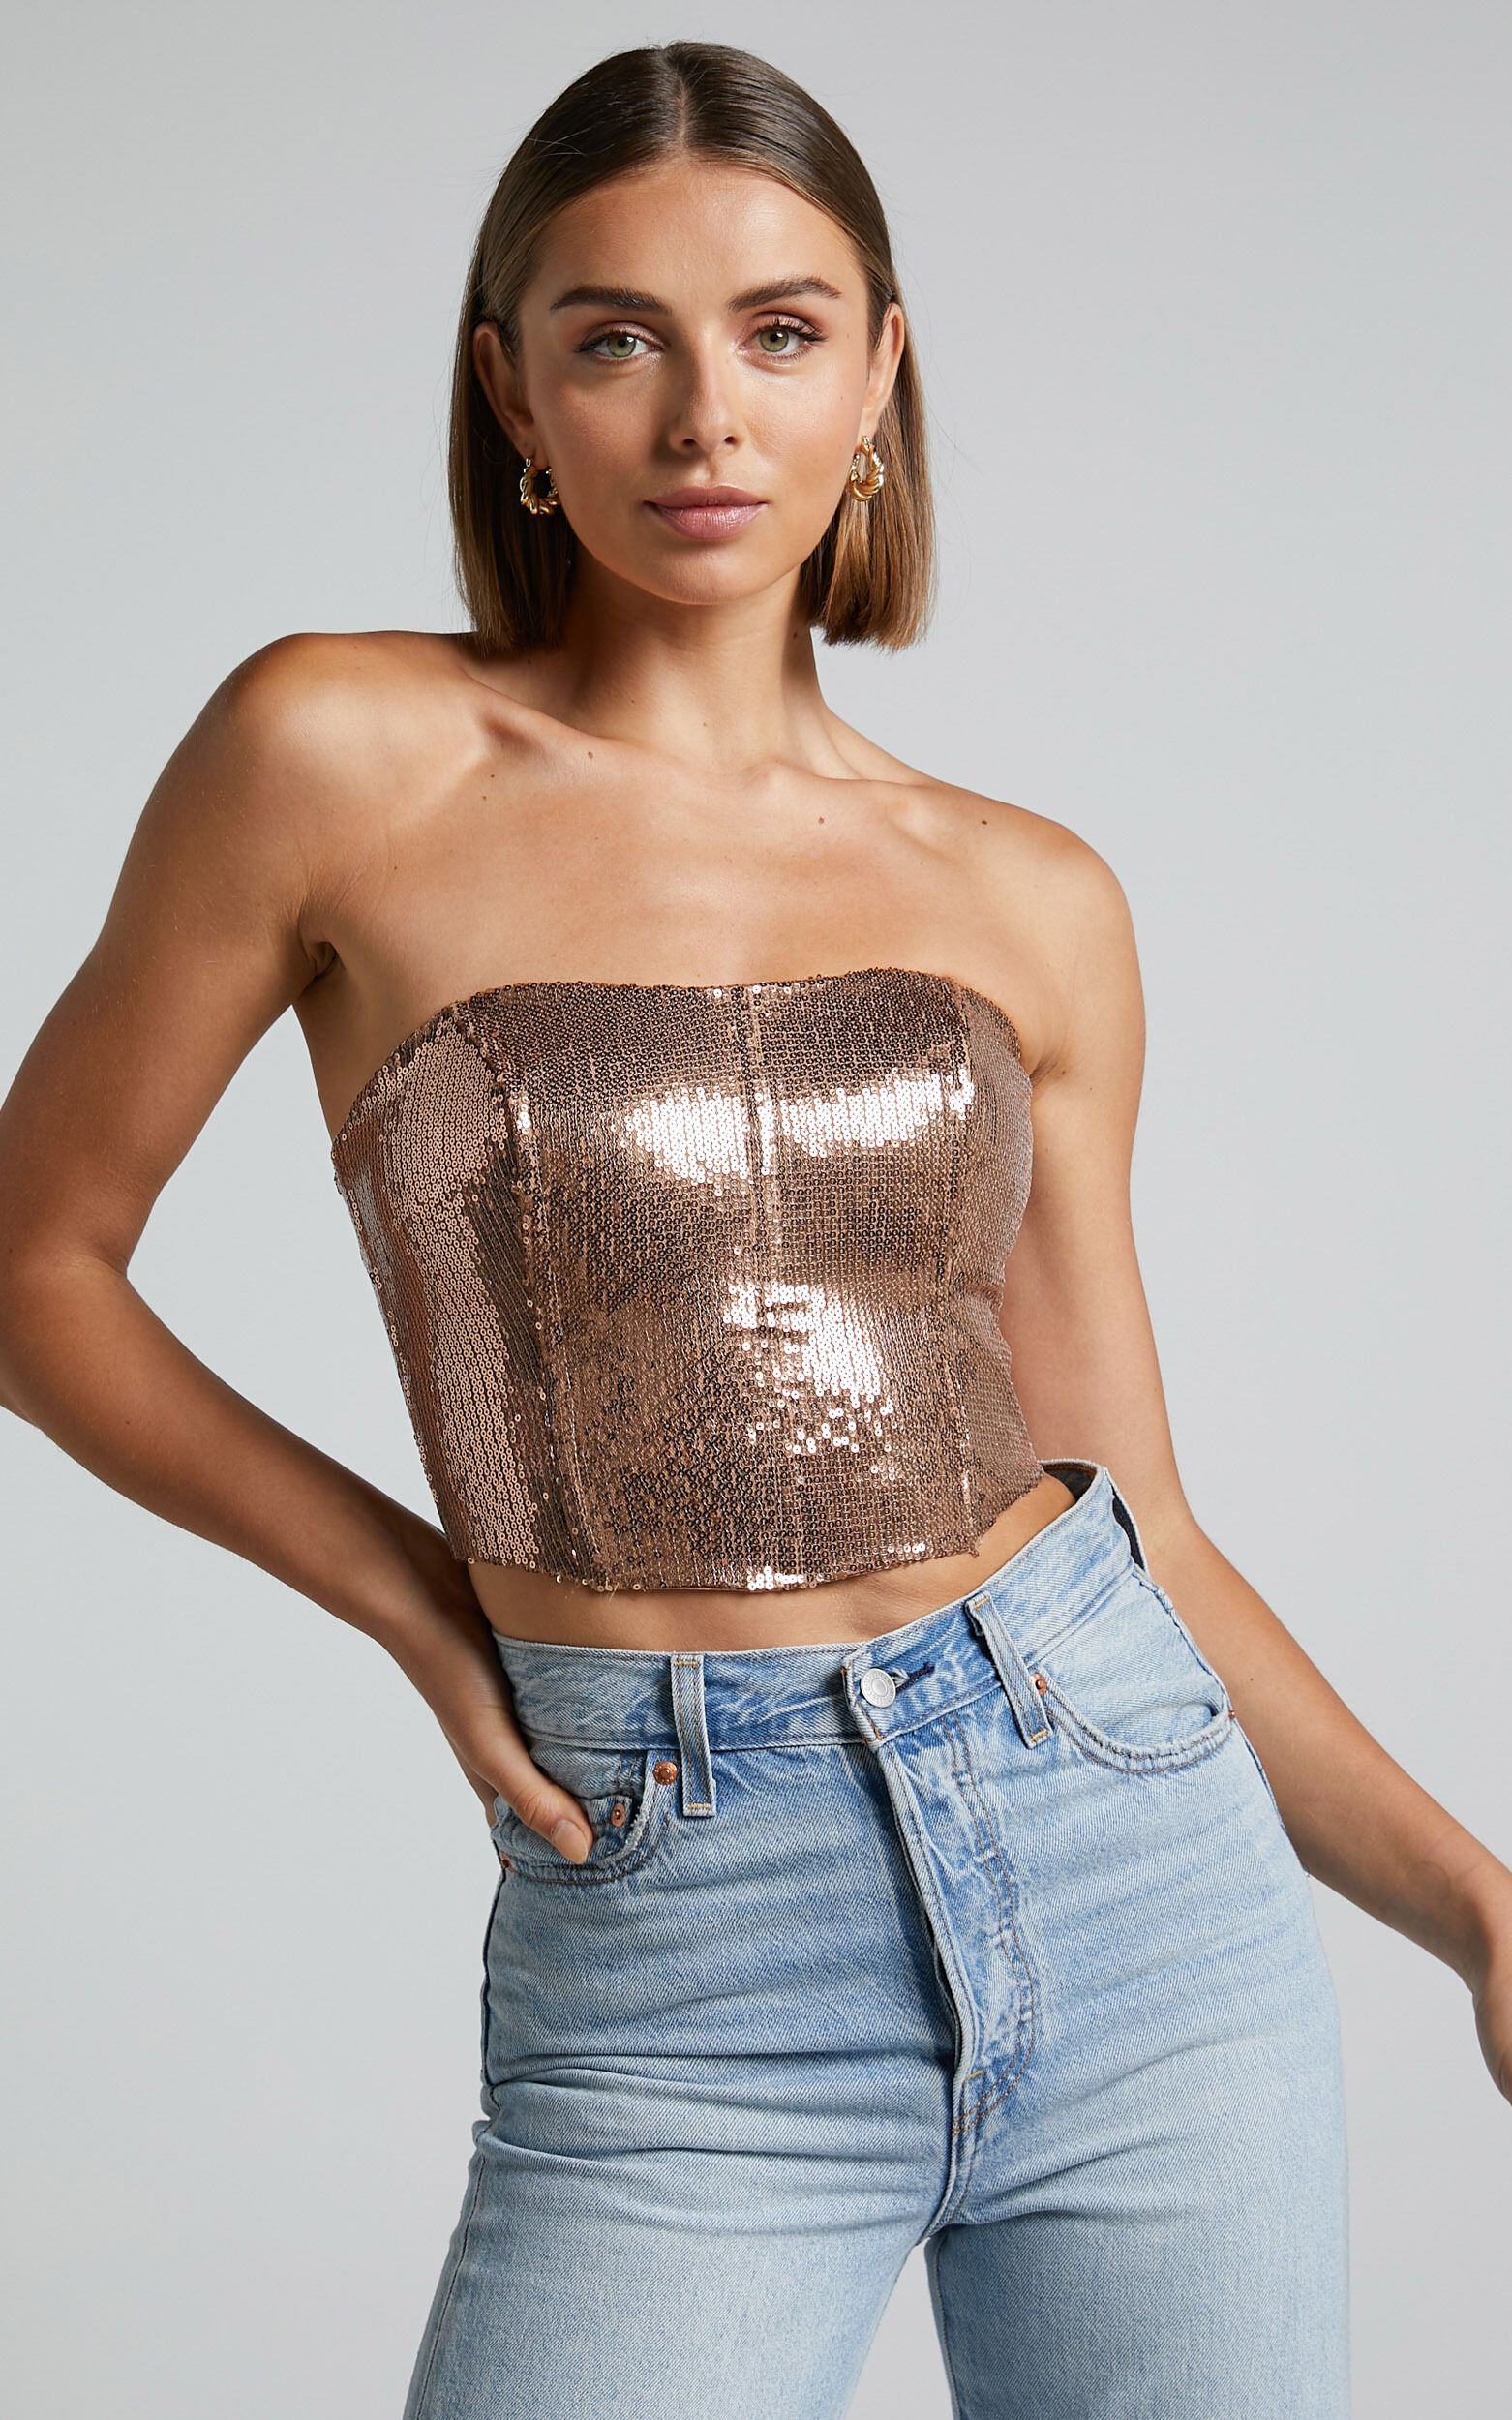 Dalphine Top - Sequin Strapless Corset Crop Top in Copper Gold - 04, GLD1, super-hi-res image number null